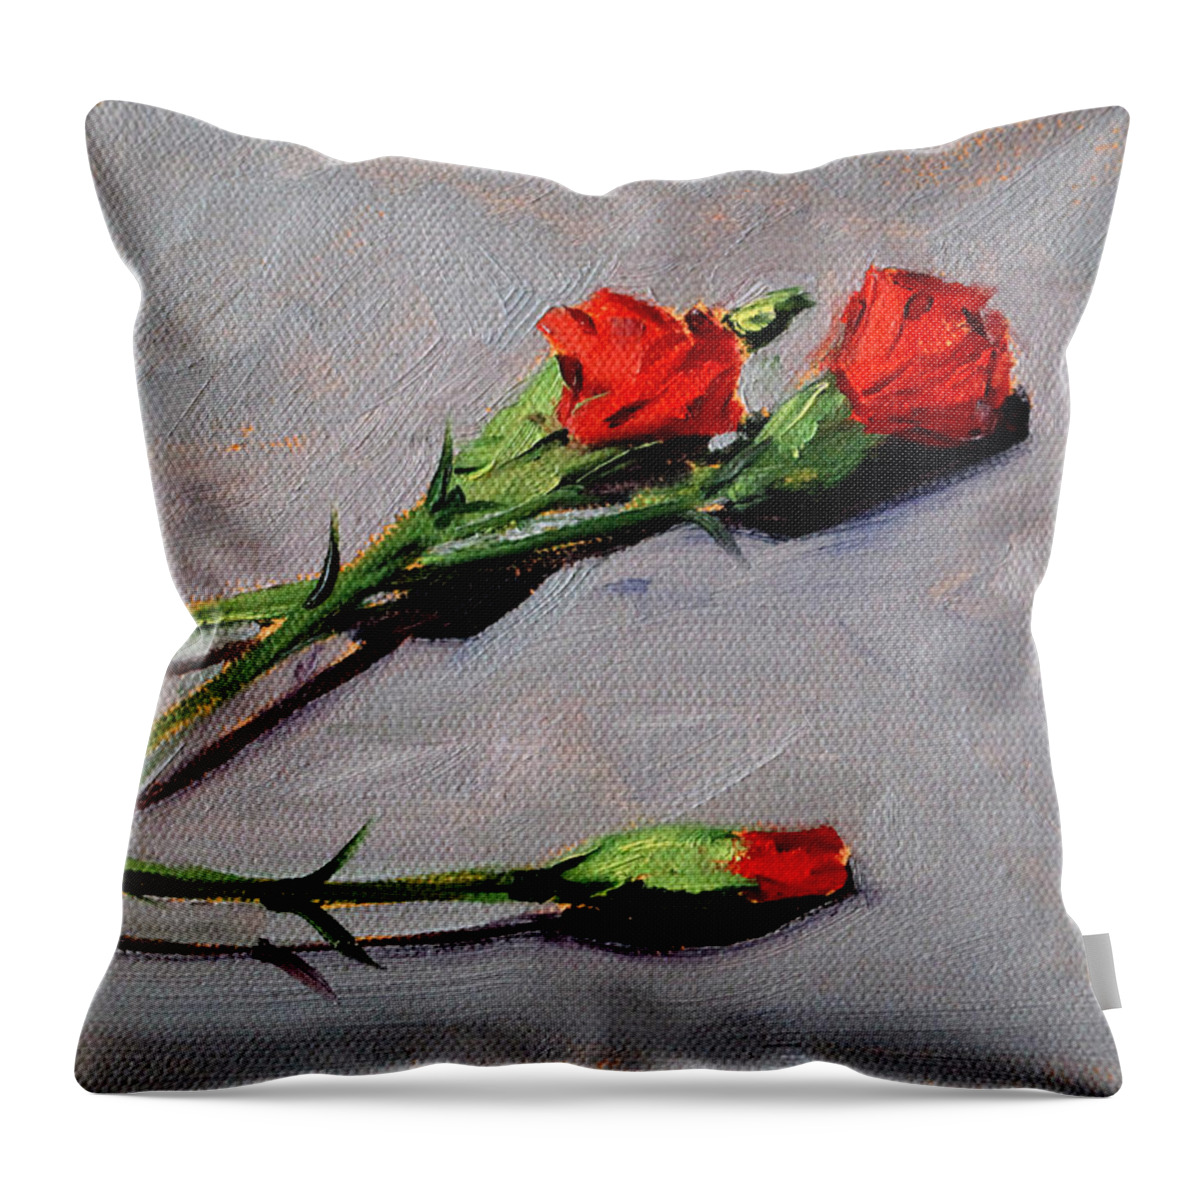 Romance Throw Pillow featuring the painting Valentine by Nancy Merkle